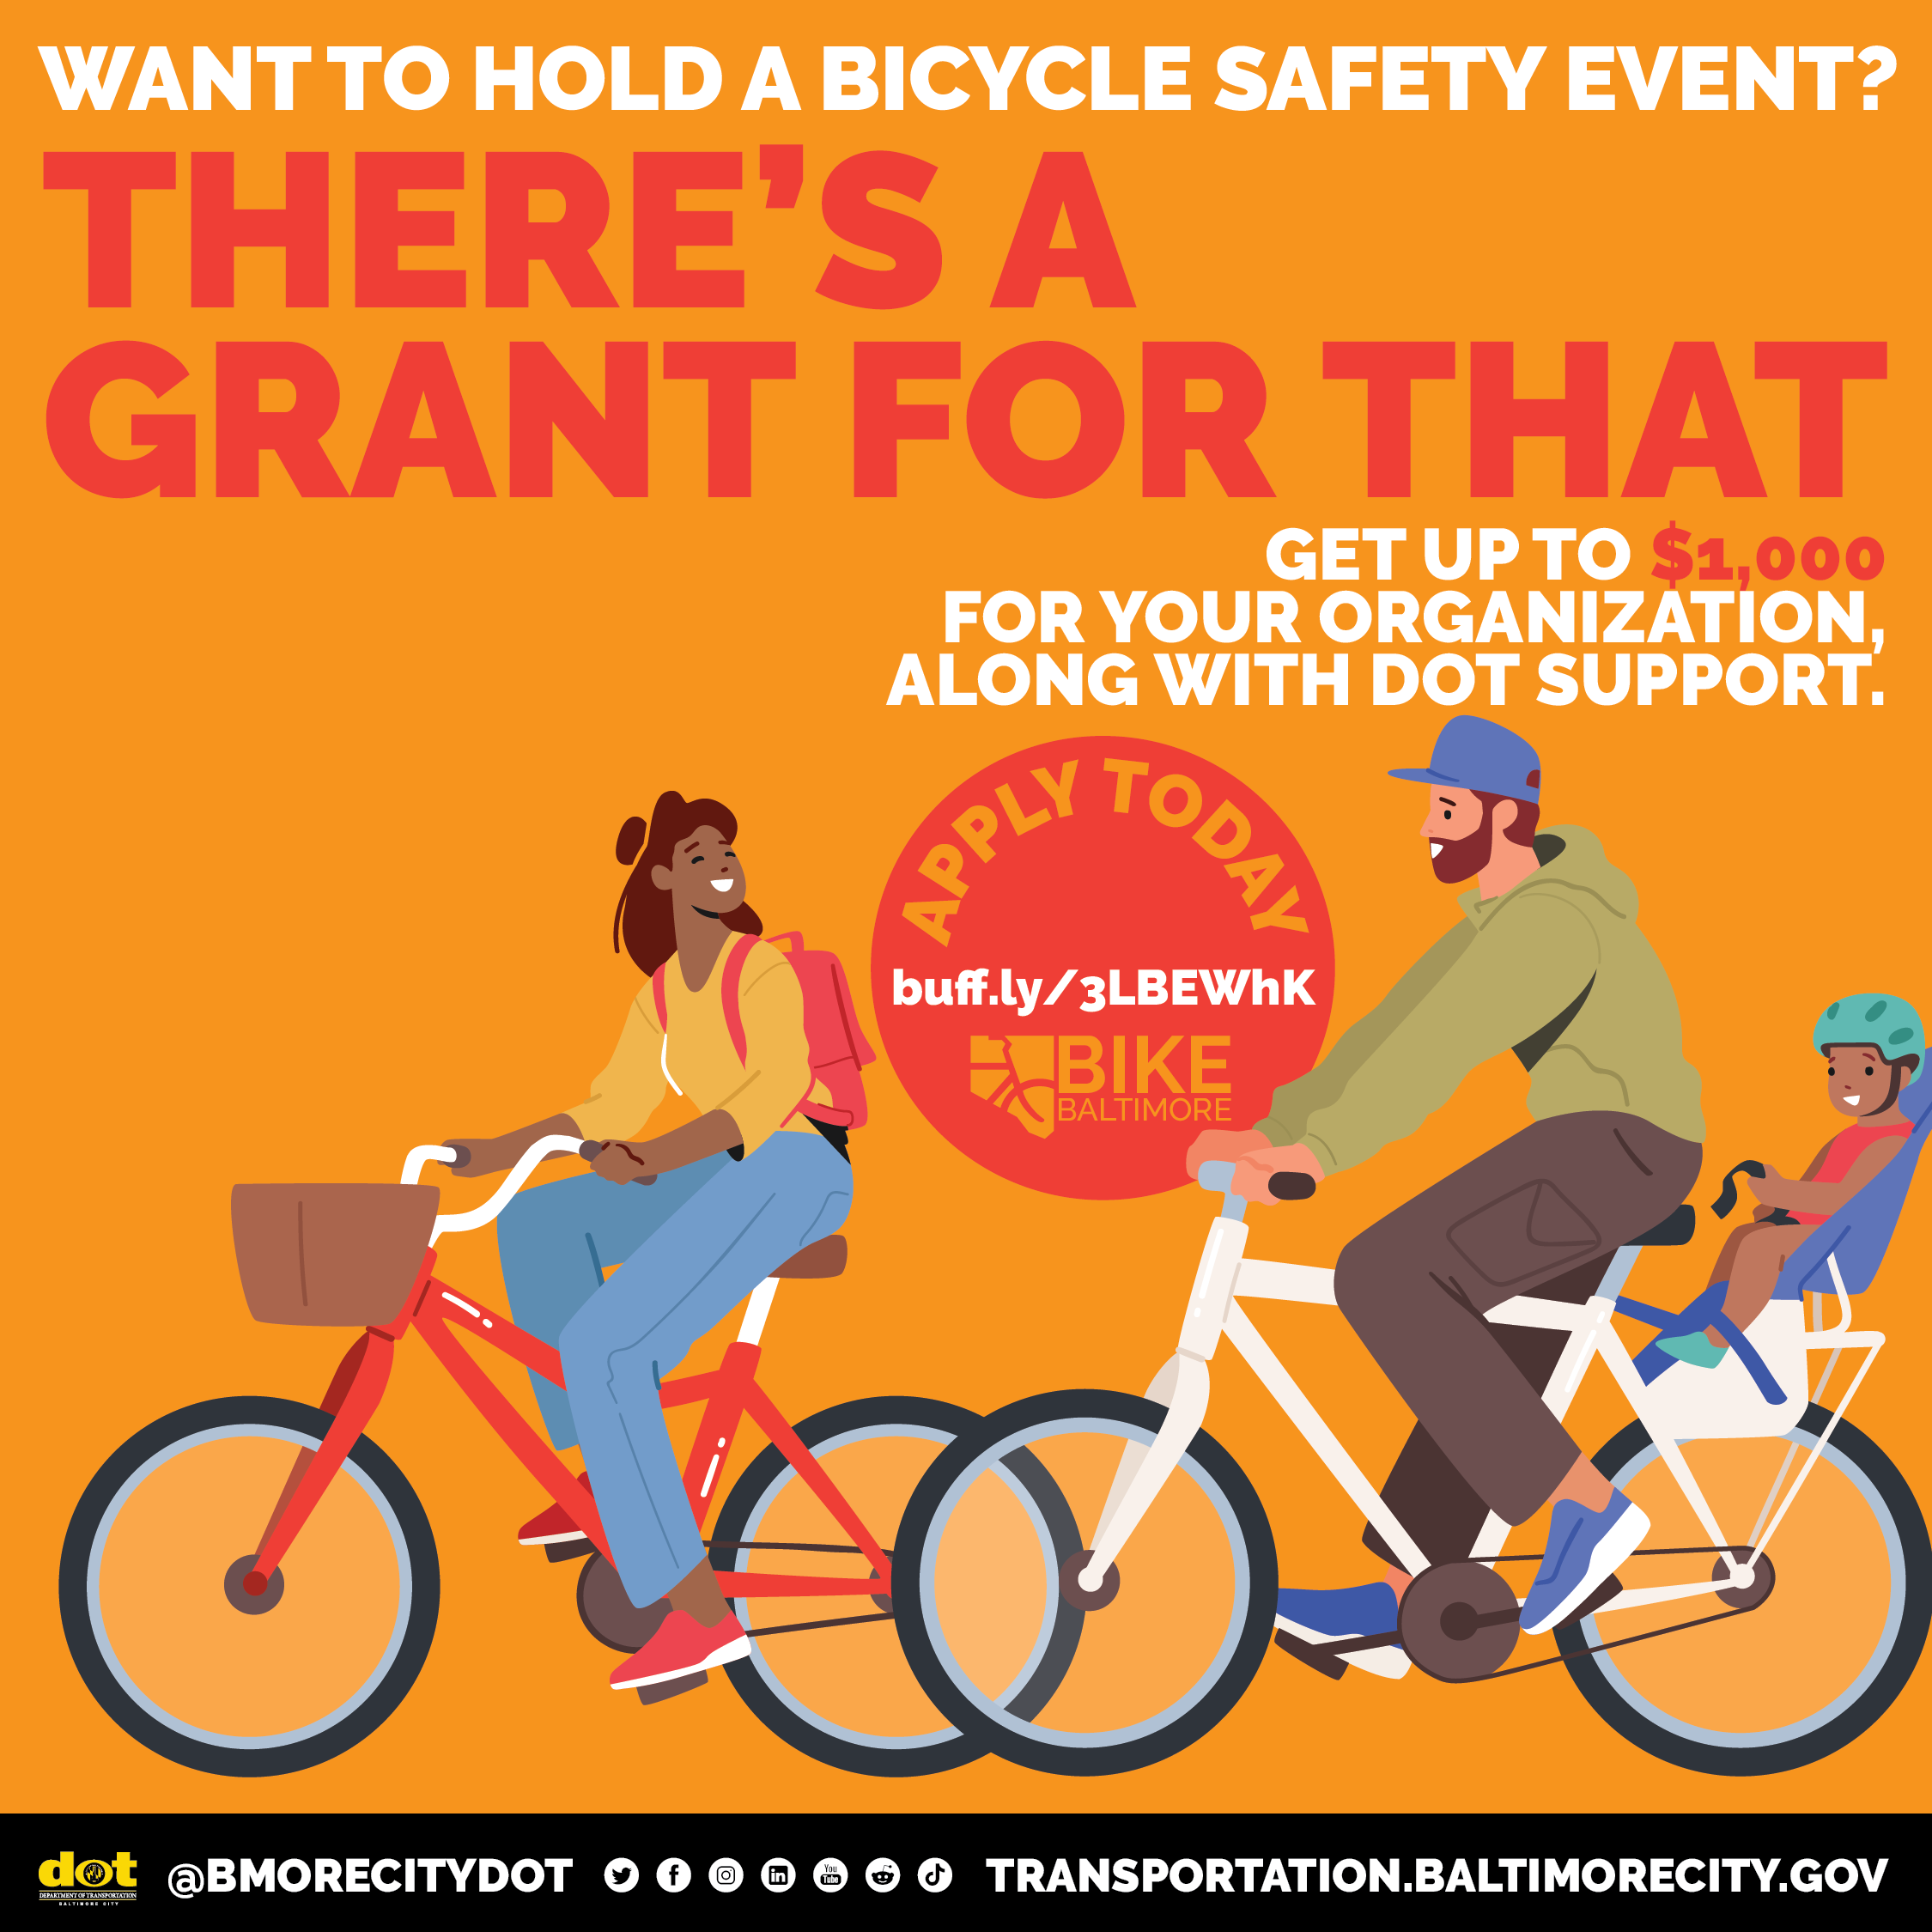 Want to hold a bicycle safety event? There's a grant for that!